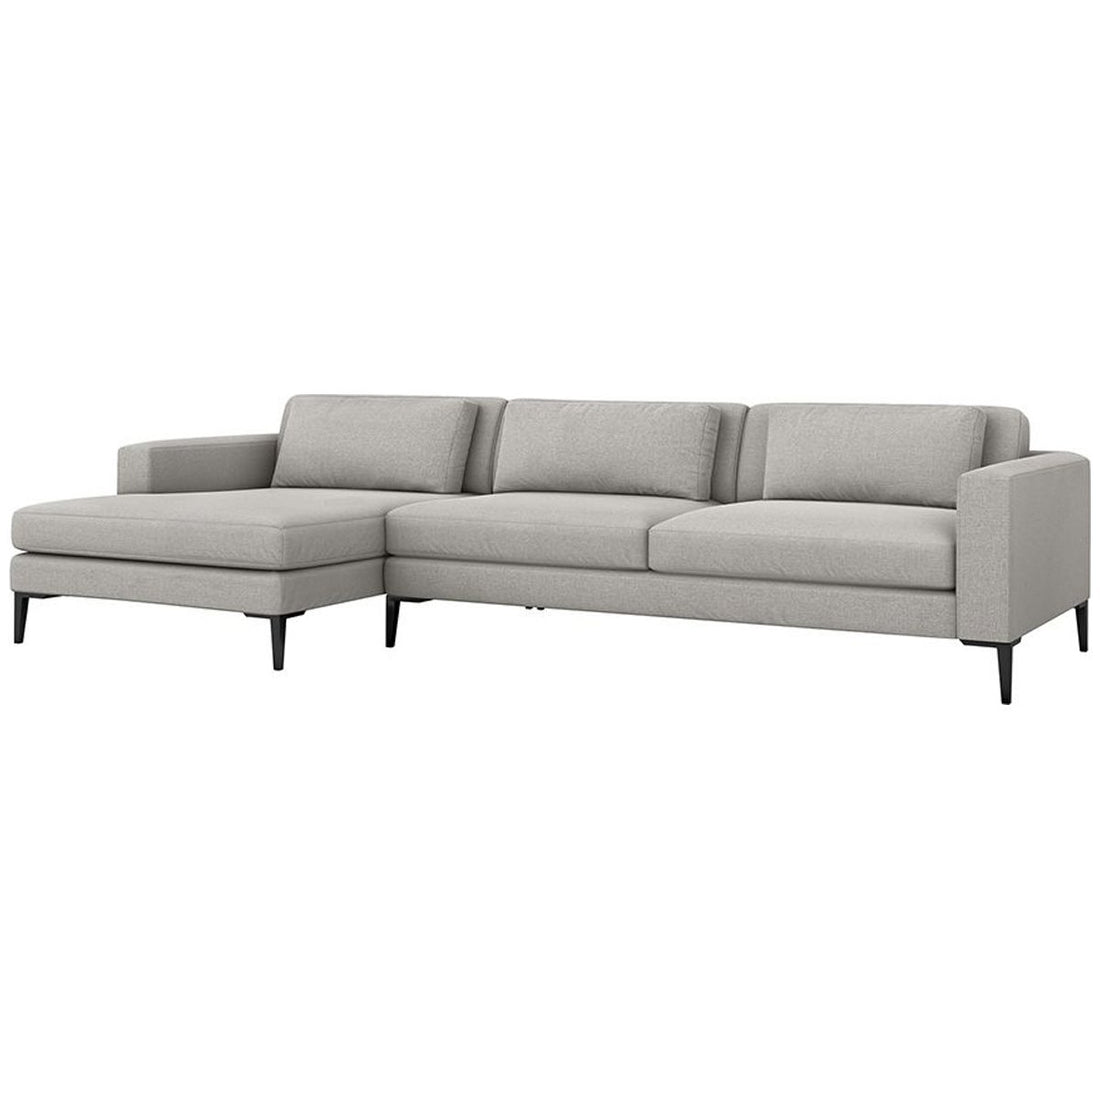 Interlude Home Izzy Sectional - Faux Linen